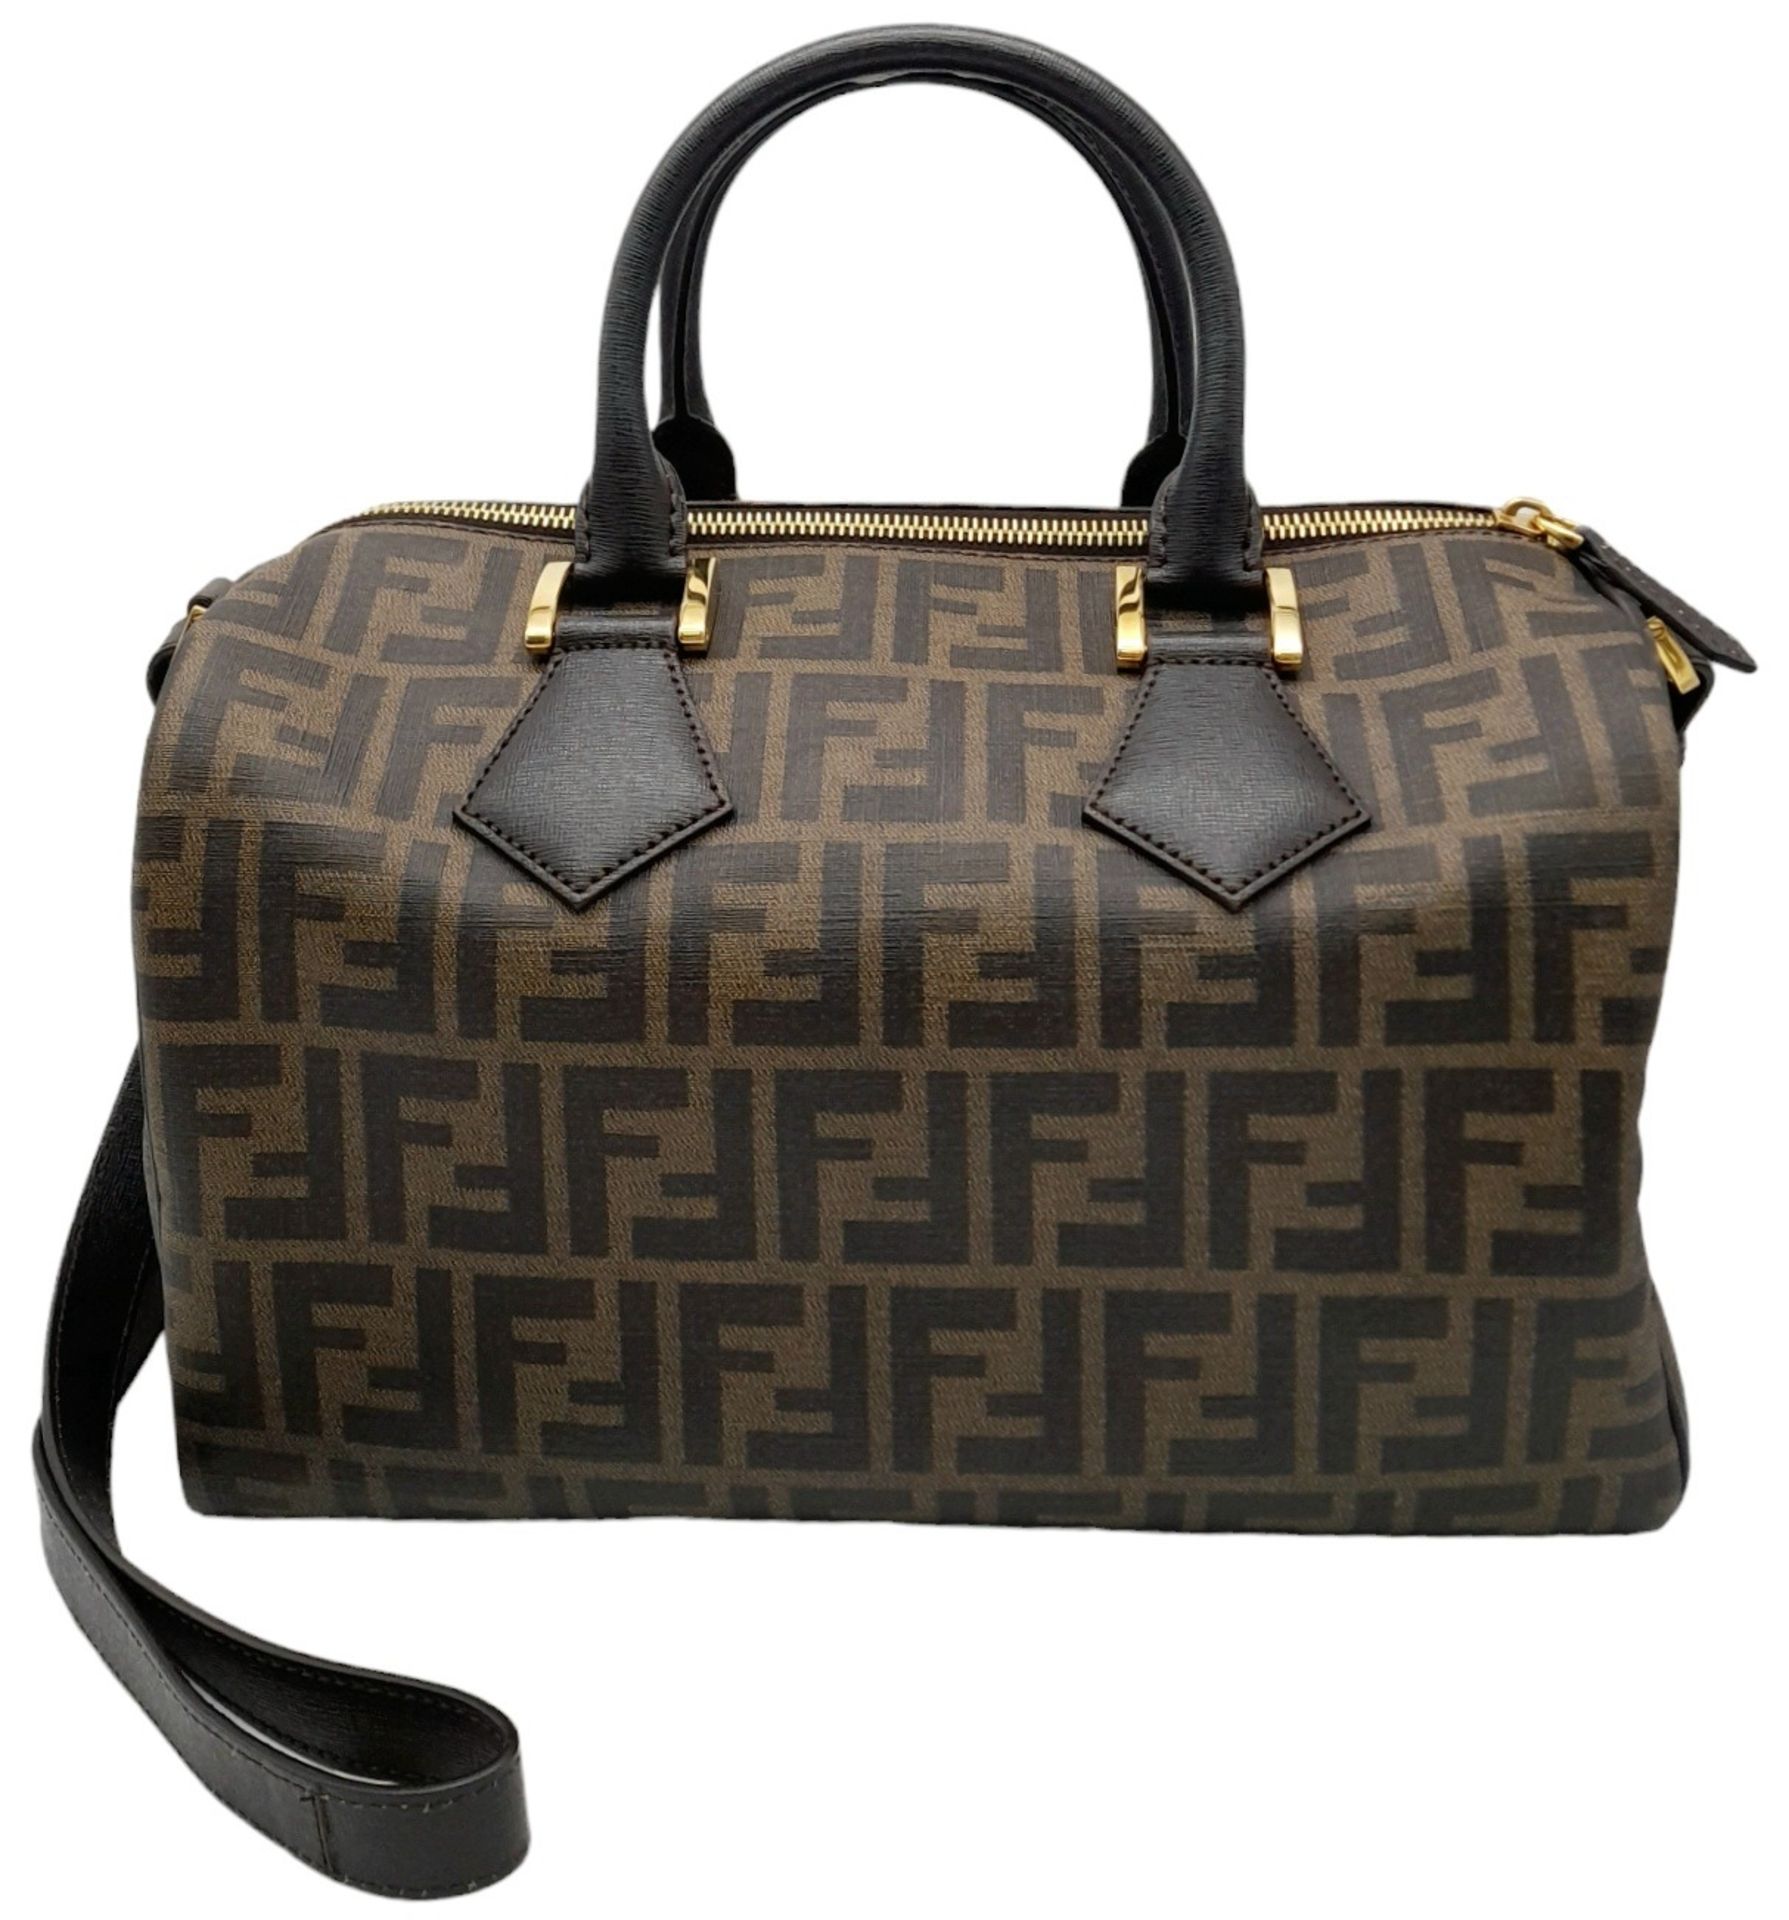 A Fendi Zucca Canvas Boston Bag. Canvas exterior, gold-tone hardware, adjustable strap, zipped top - Image 7 of 9